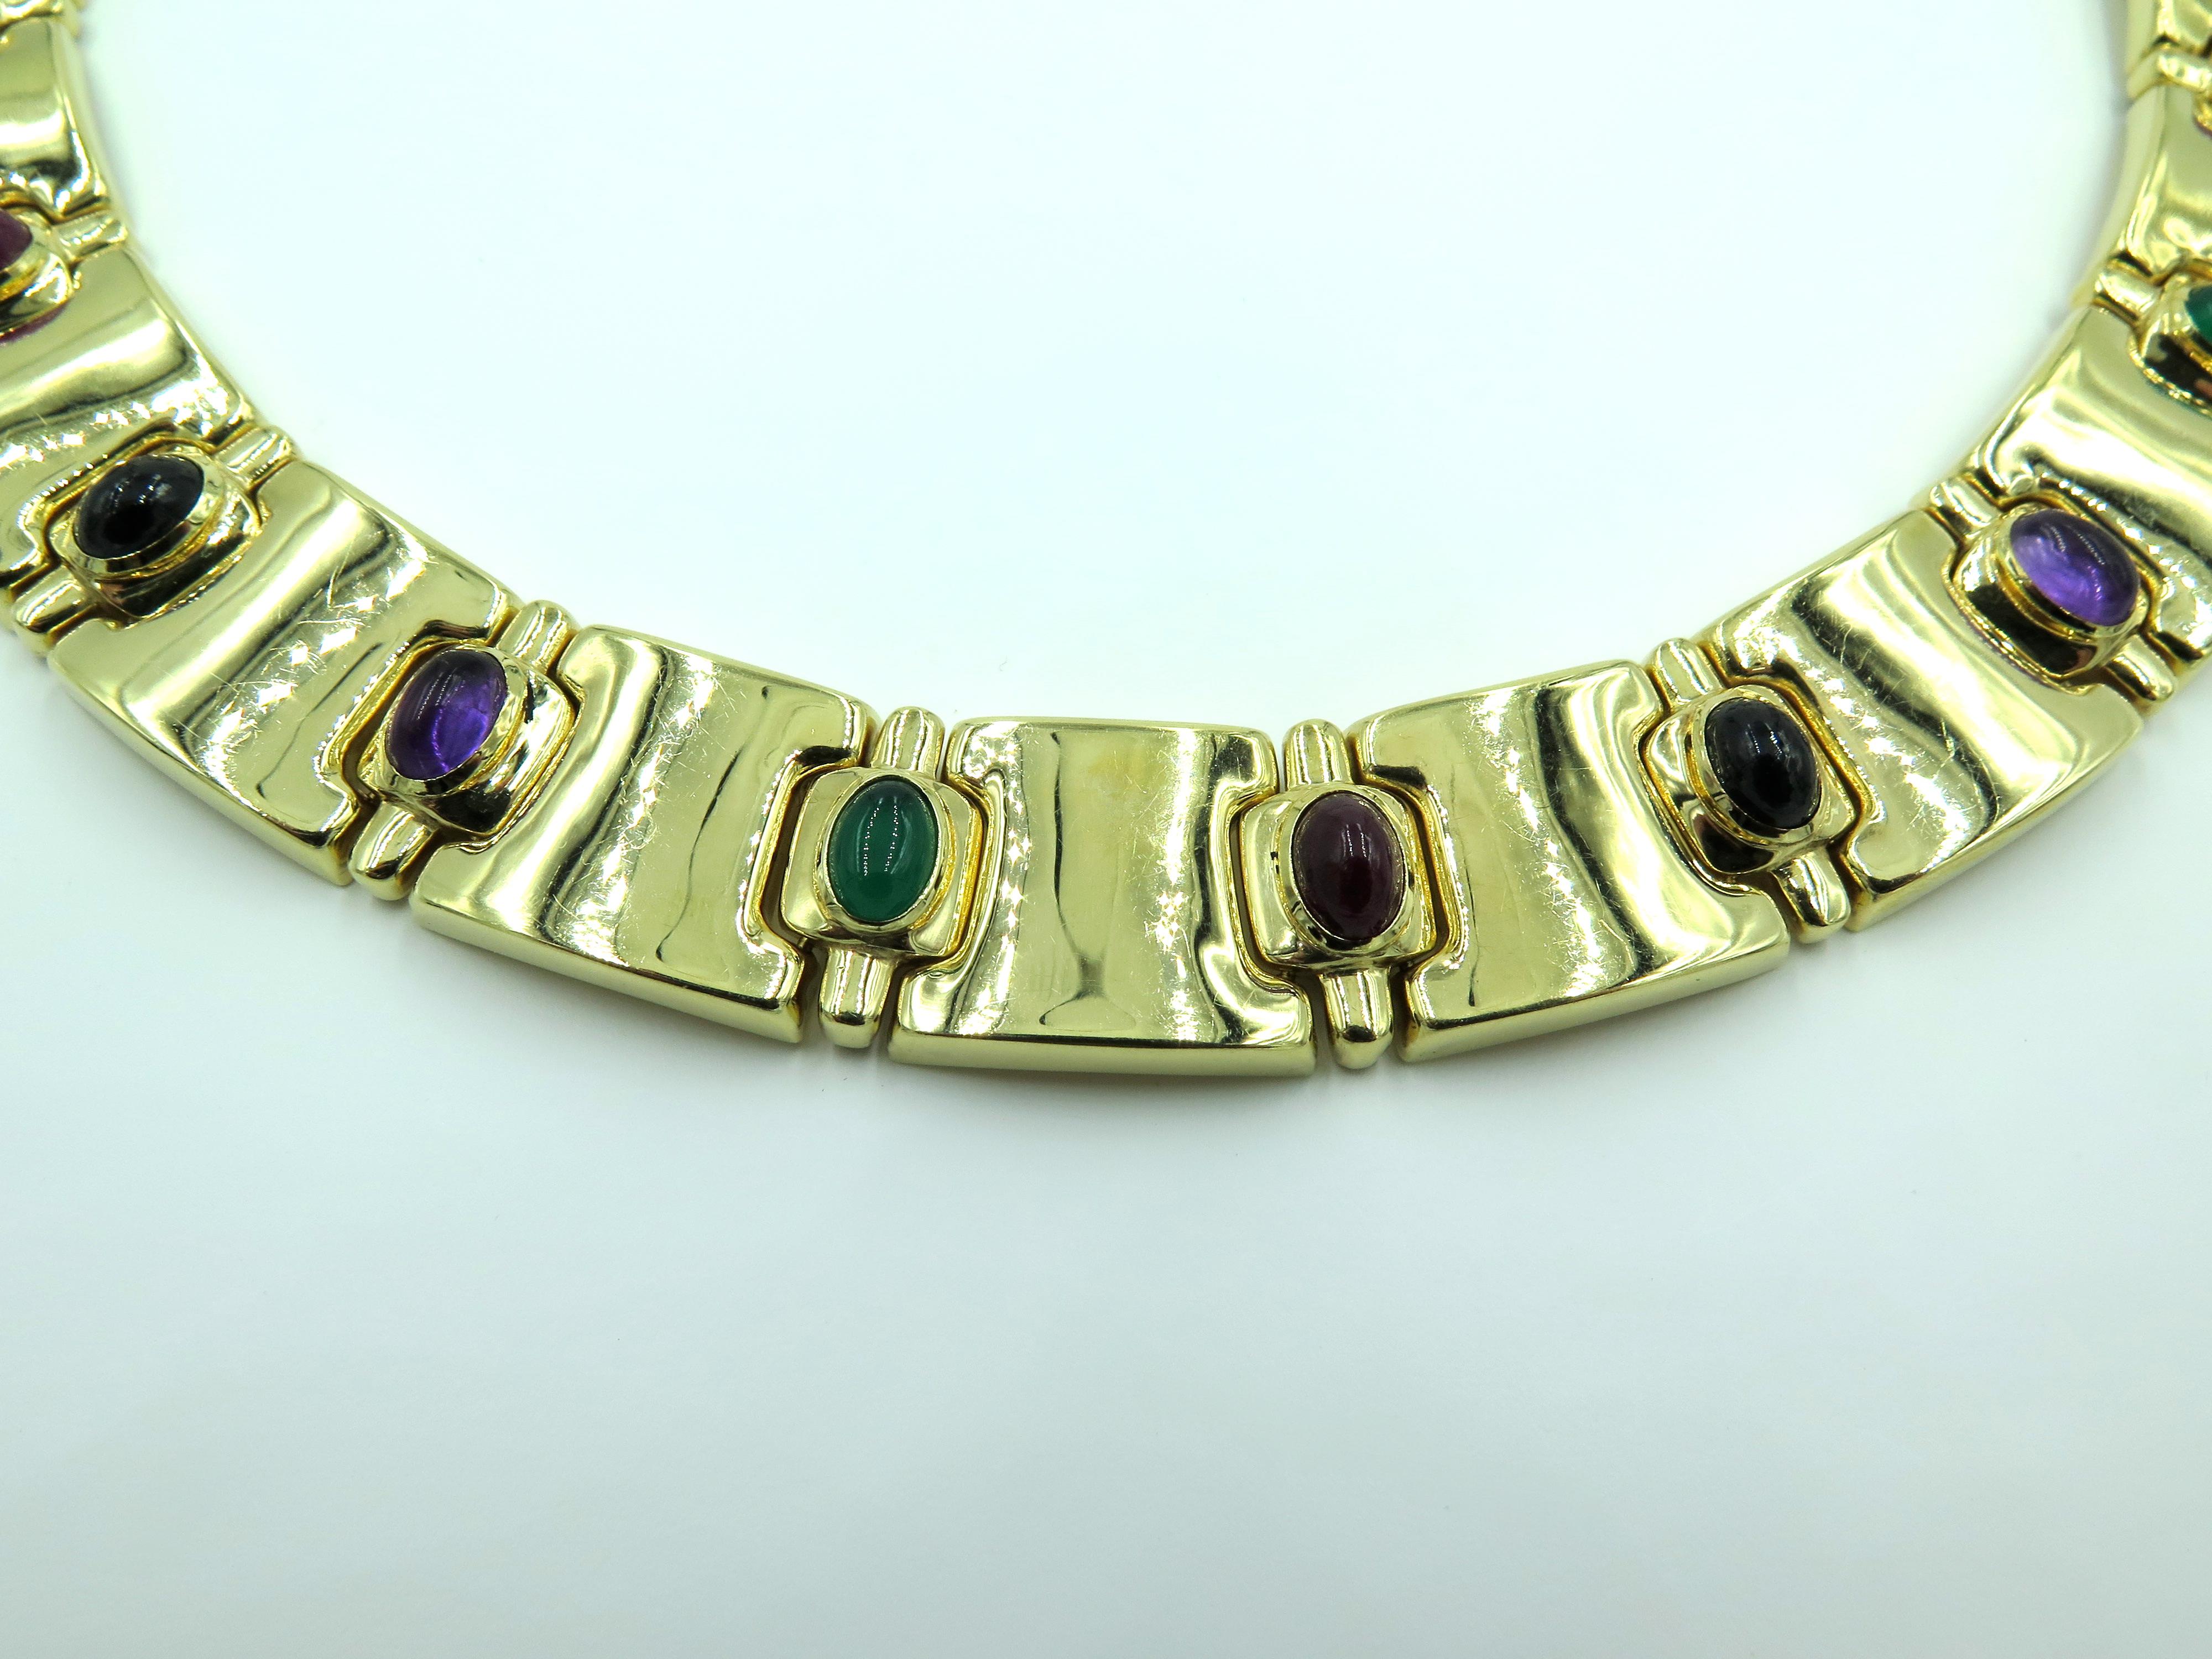 A 14 karat yellow gold and gemstone necklace. Circa 1980. Italian. The collar designed as polished gold rectangular links, the front set with cabochon emerald, ruby, onyx and amethyst. Length is approximately 16 inches, gross weight is approximately